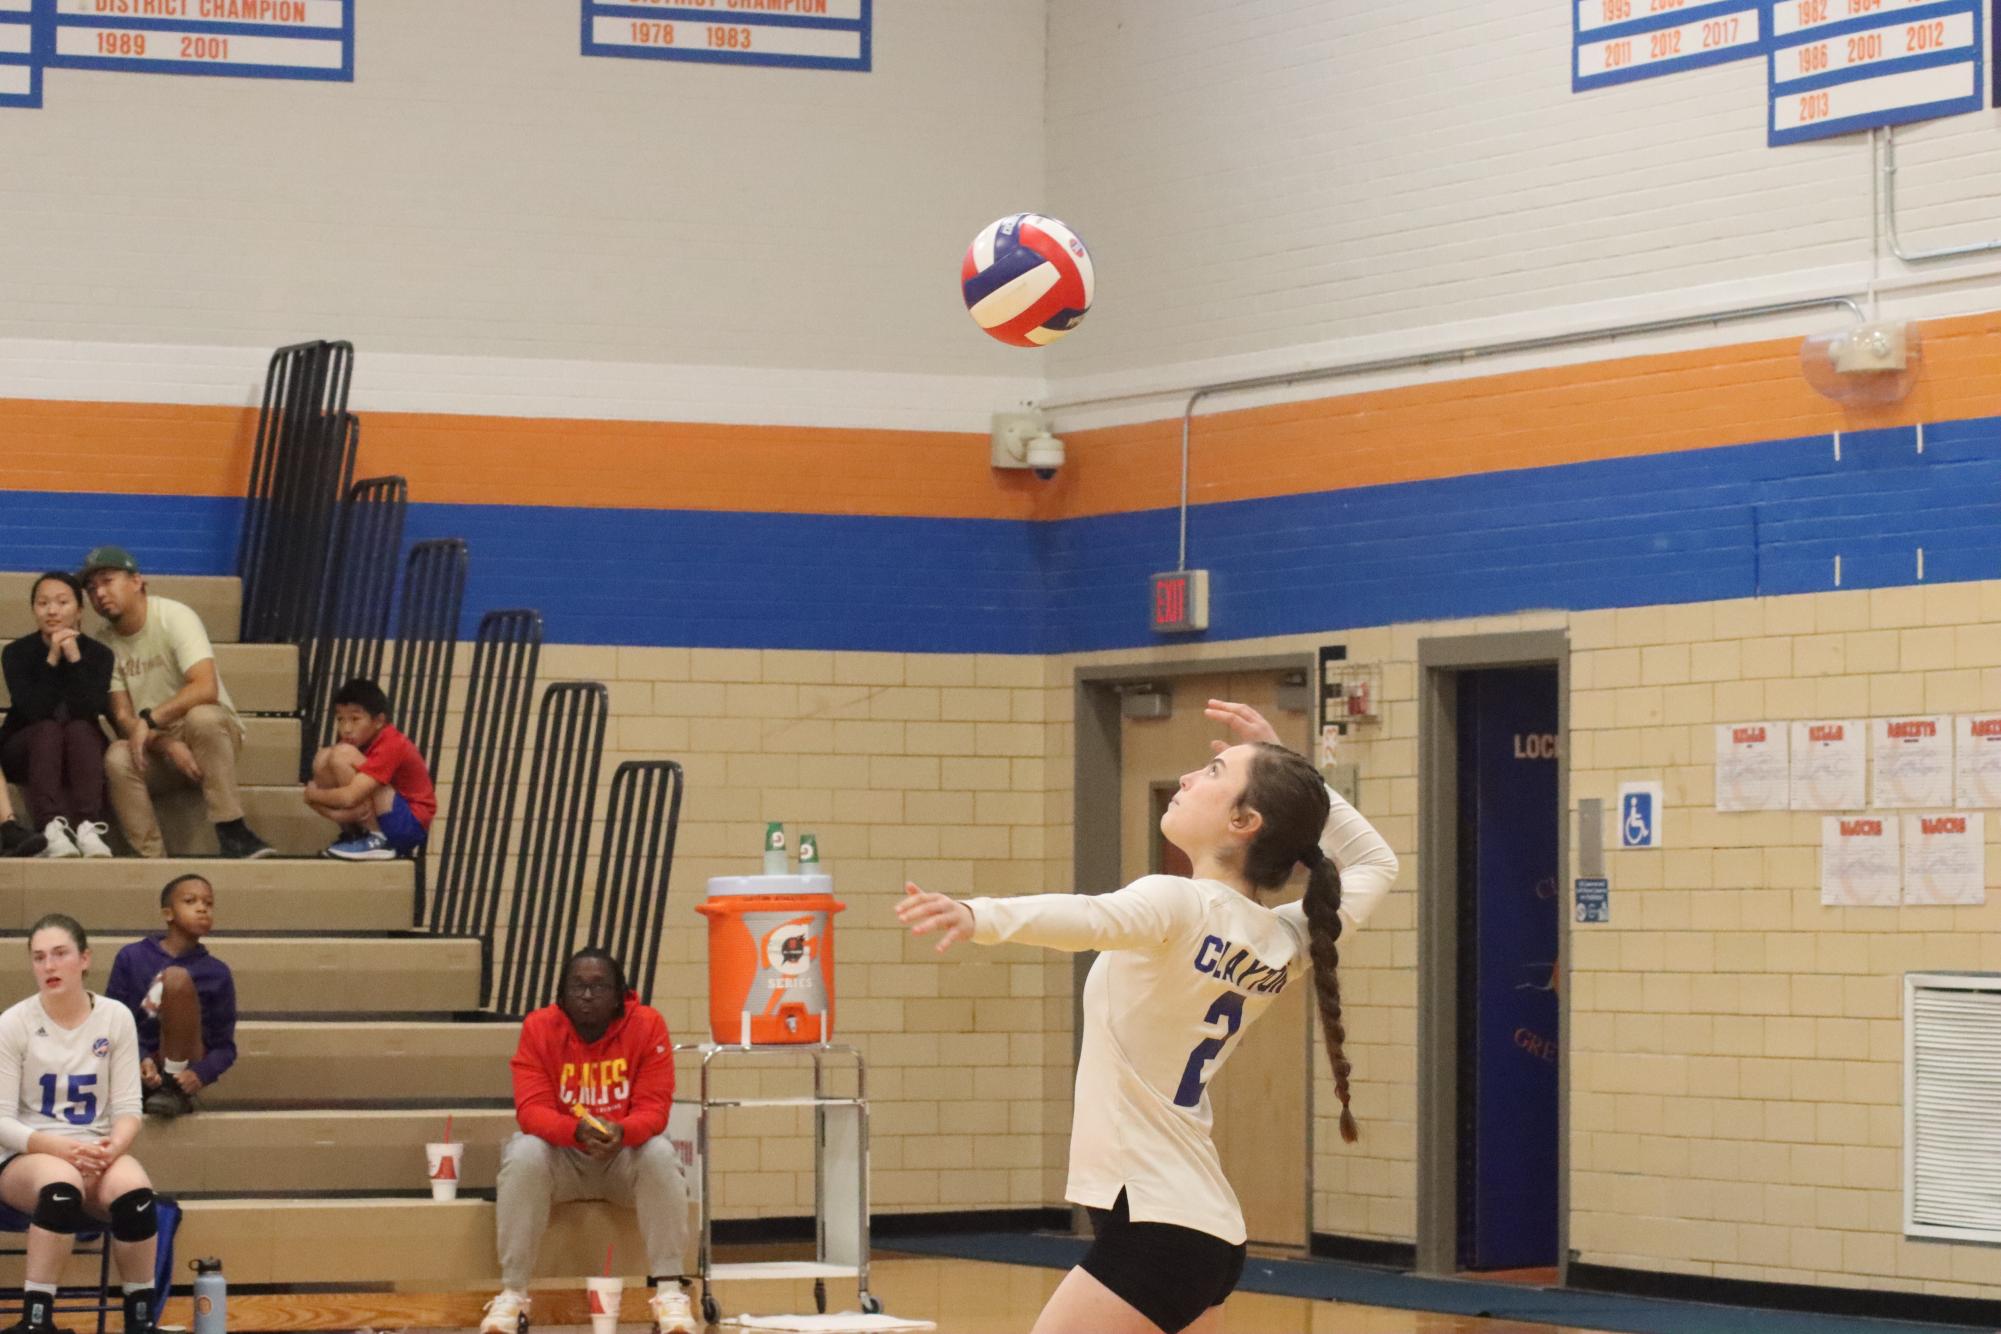 The final playoff game, junior Iselin Haldimann serves the ball into play. On Oct. 24, the CHS girls varsity volleyball beat MICDS to win the district championship title.